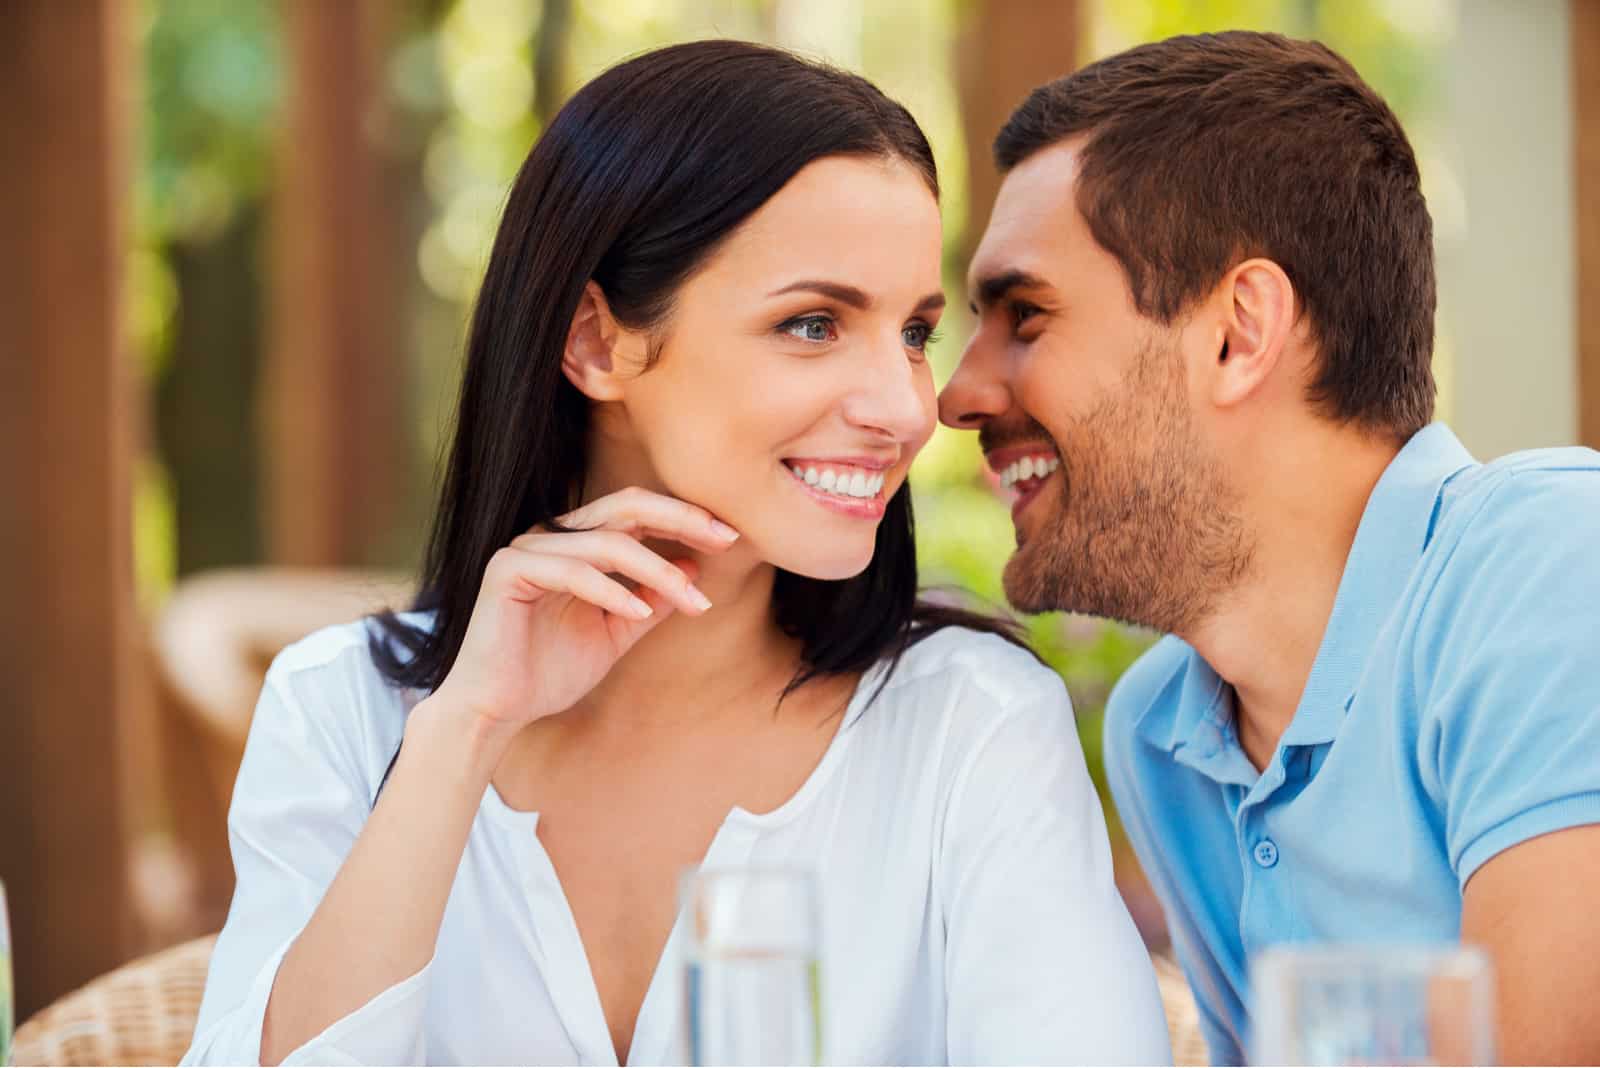 Handsome young man telling something to his girlfriend and smiling while sitting at the table outdoors together